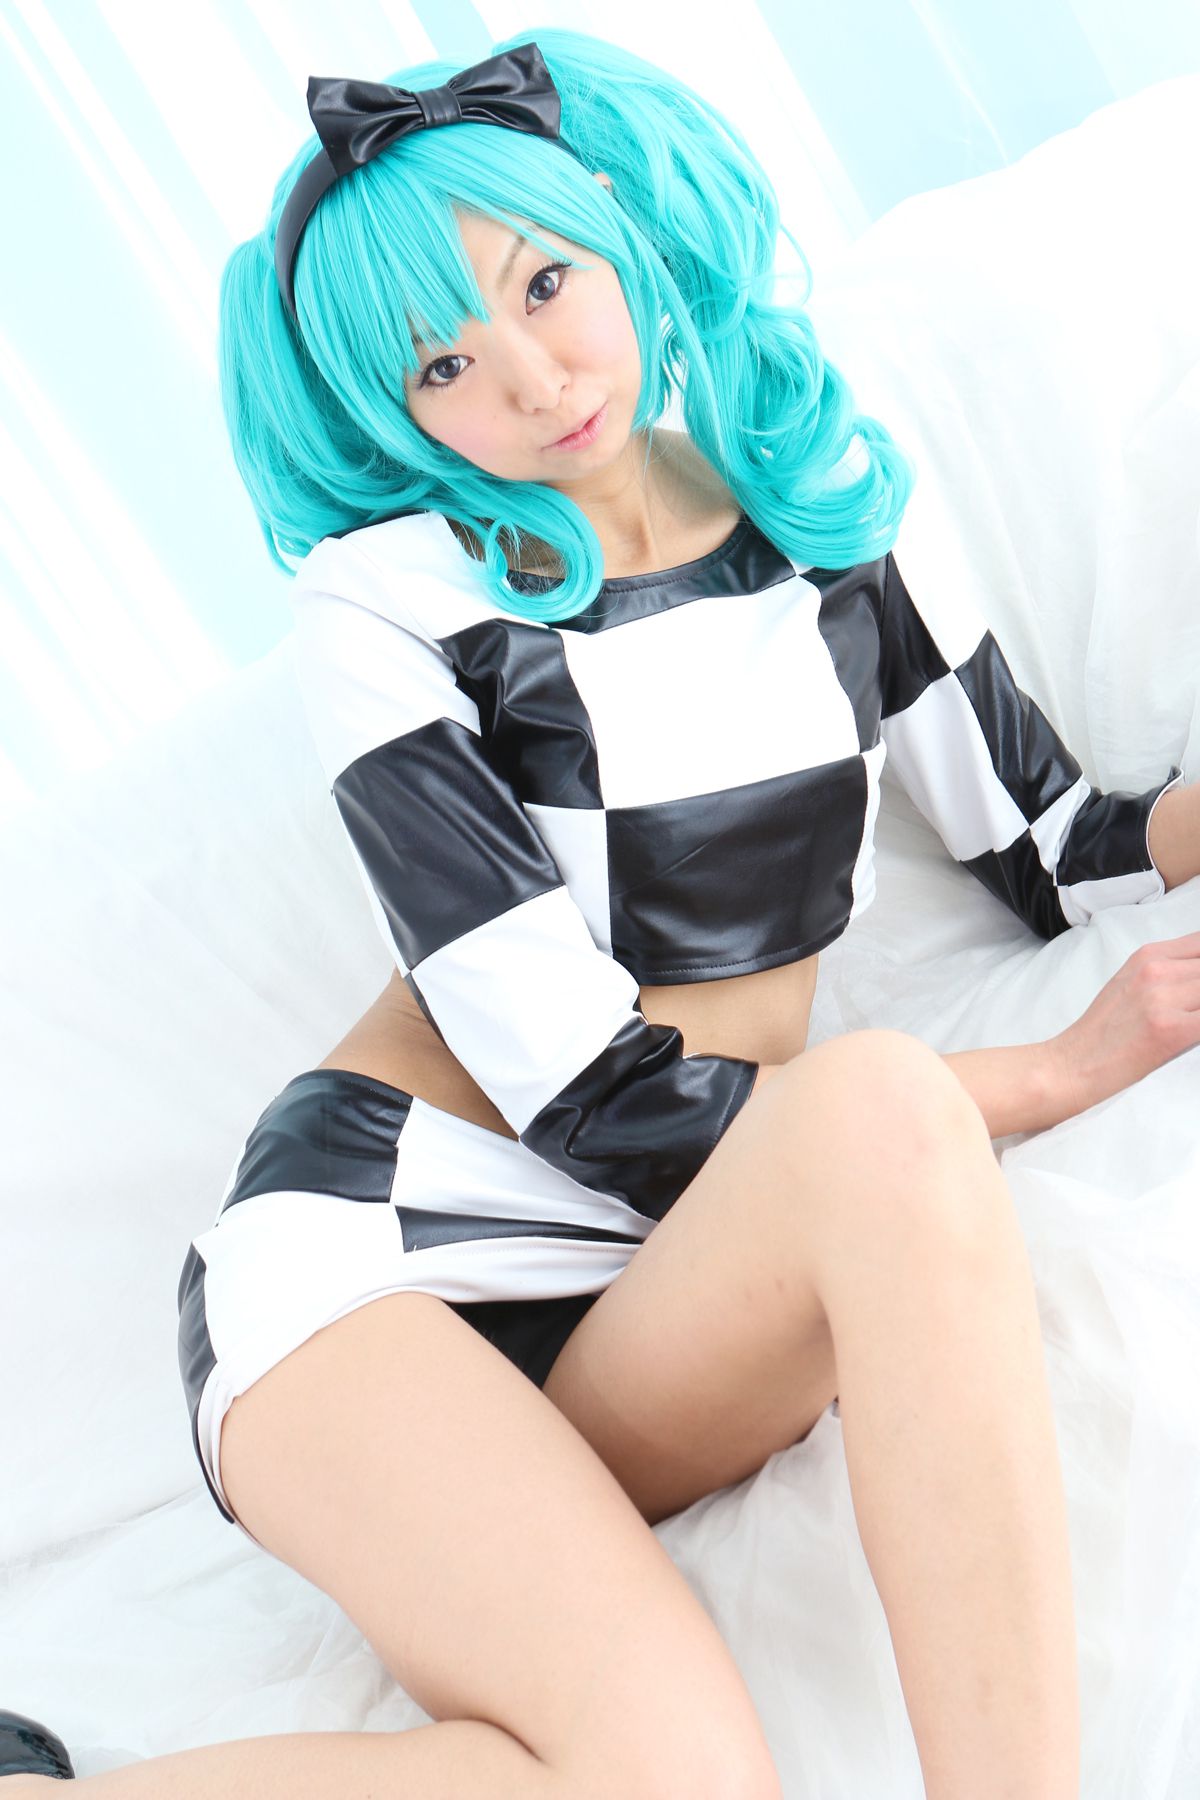 taotuhome[Cosplay套图] New Hatsune Miku from Vocaloid - So Sexy第19张